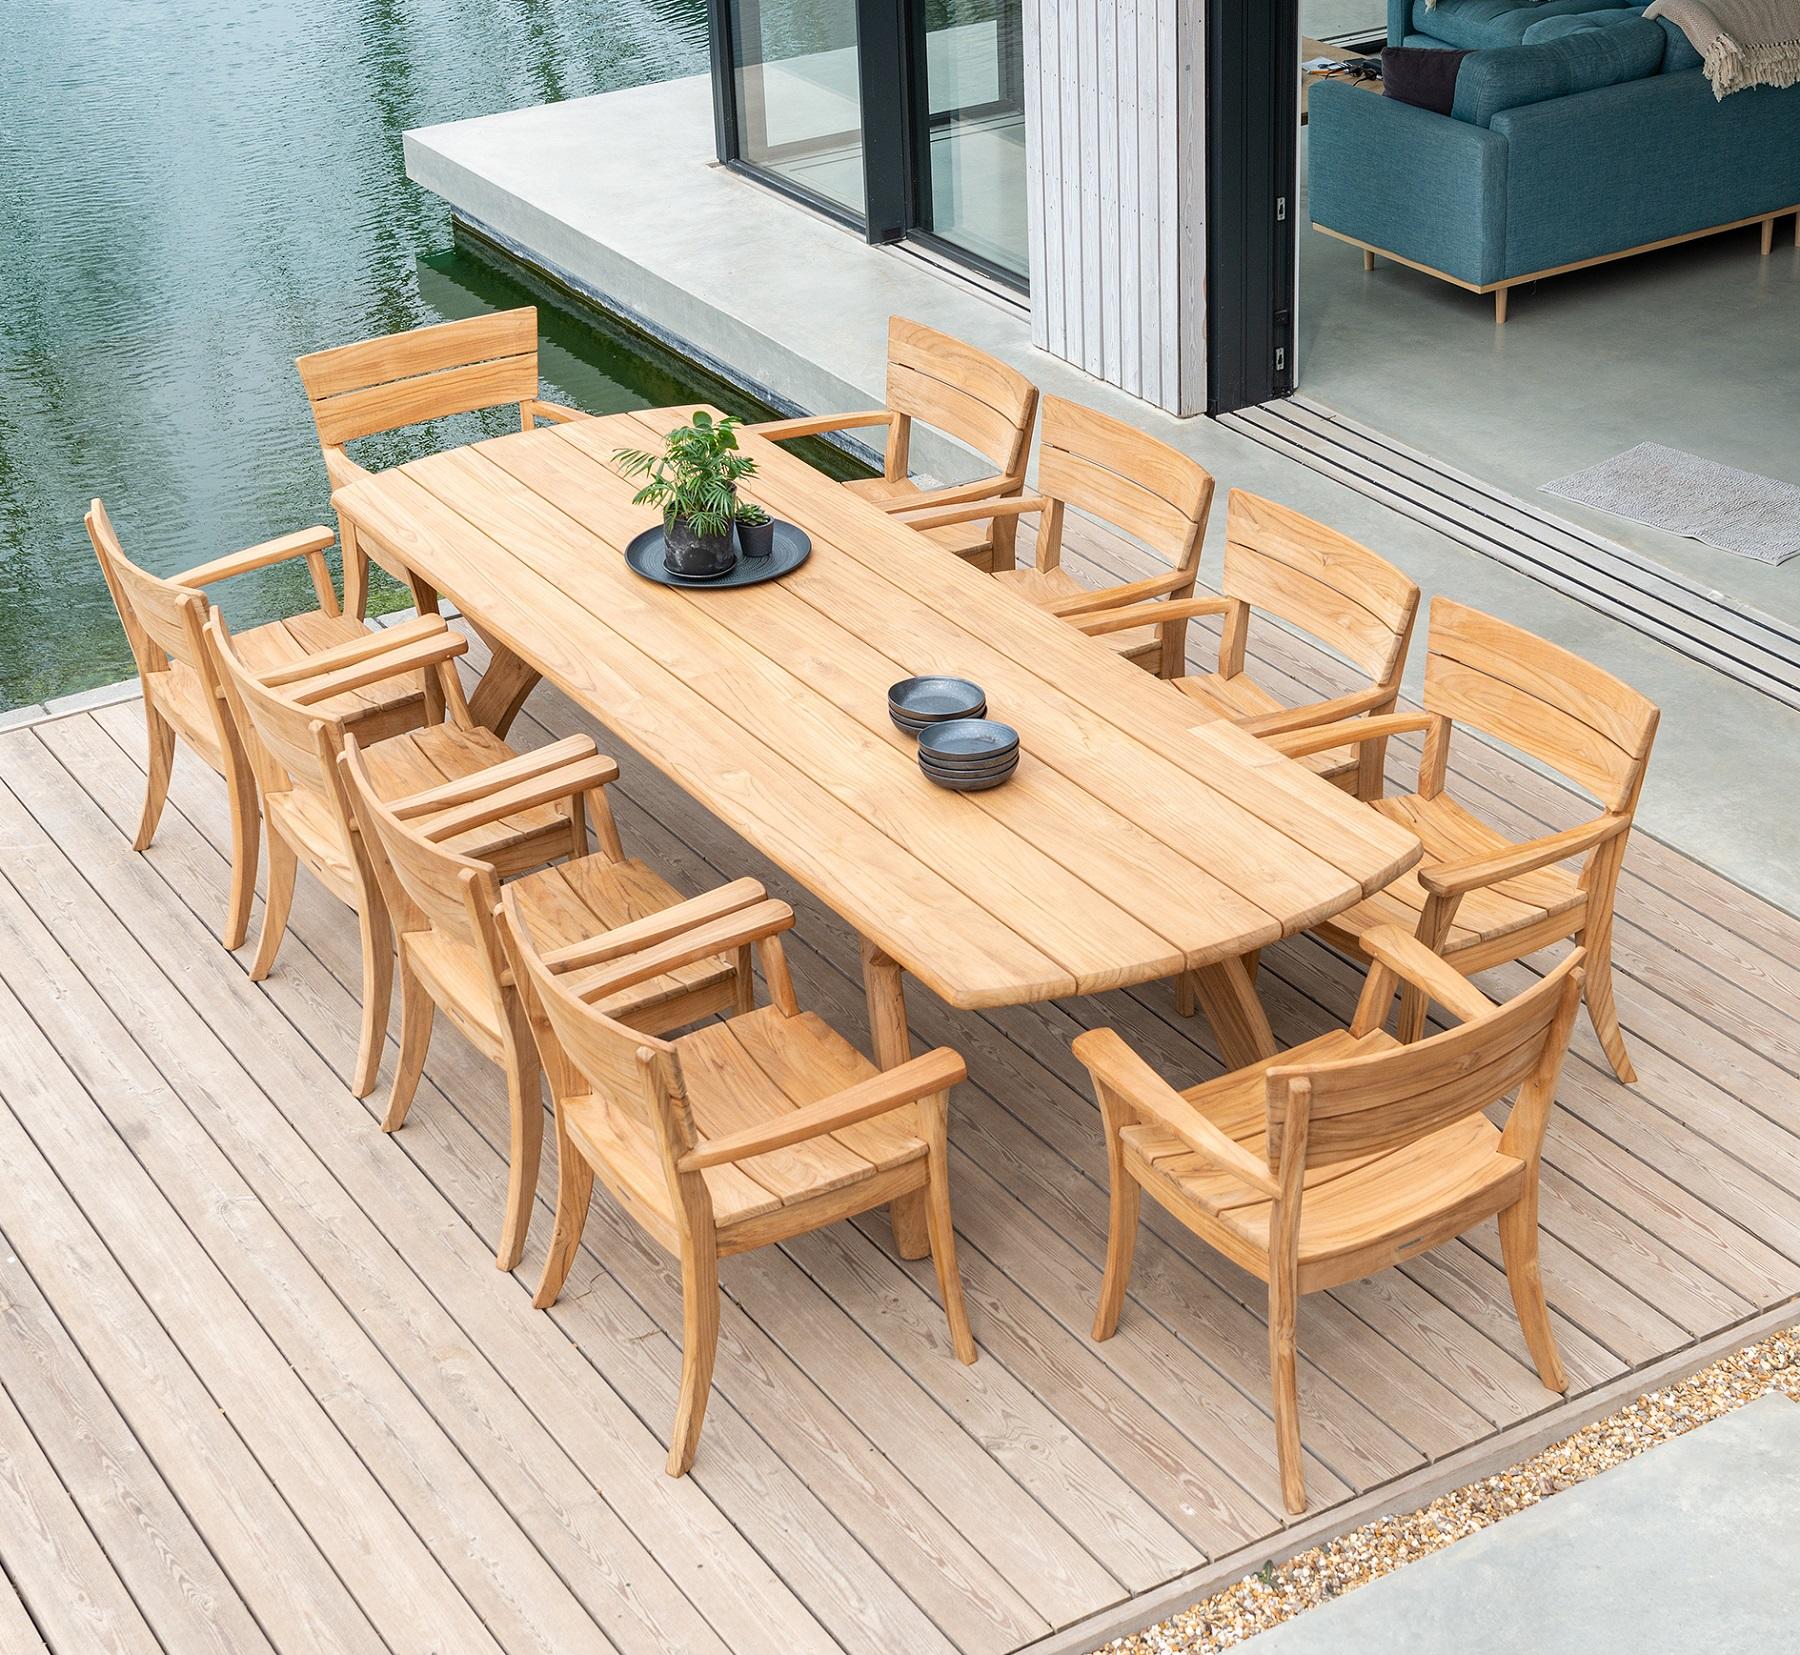 teak 3 m garden dining table and 10 teak dining chairs for patio furniture